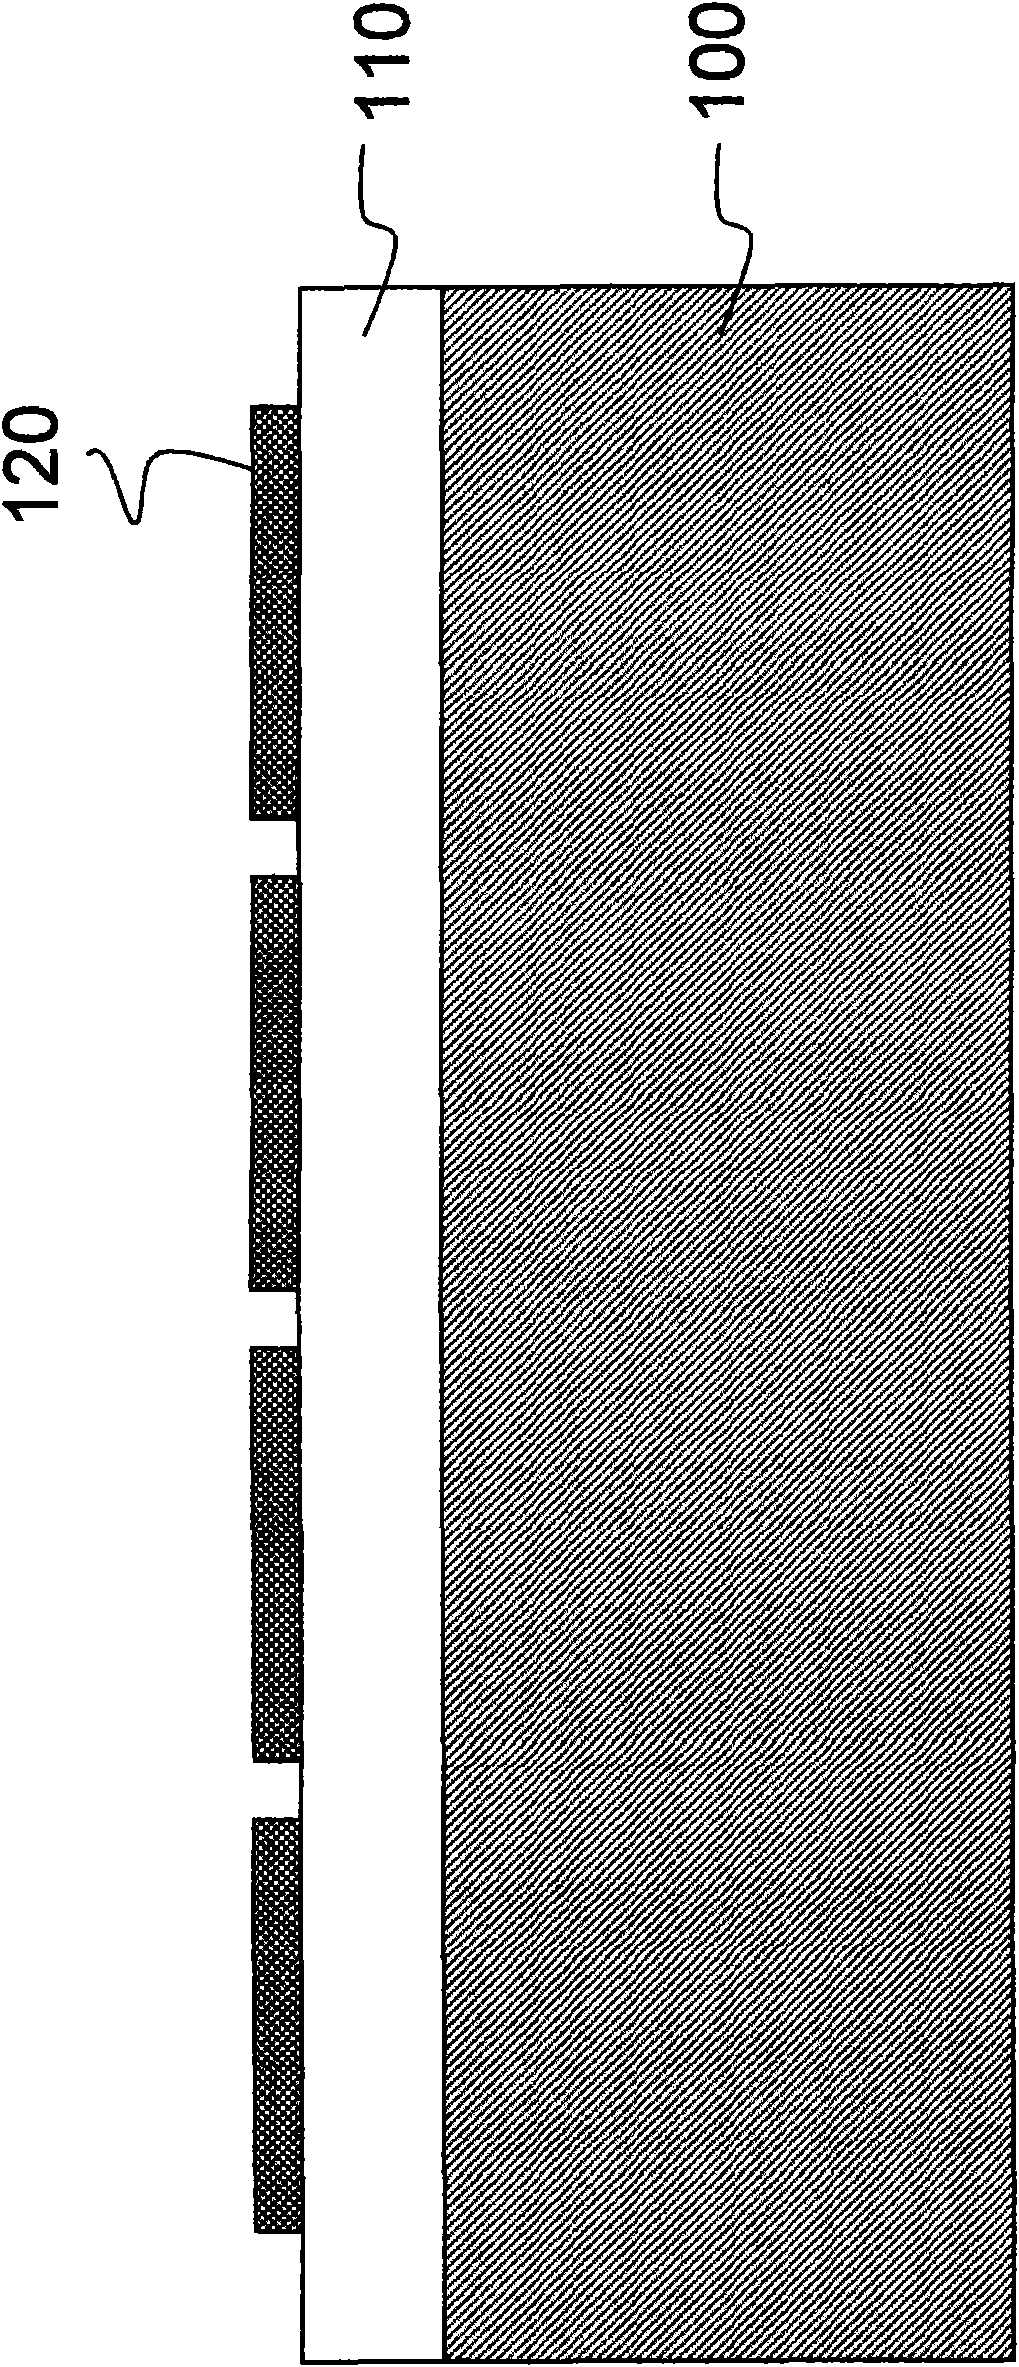 Multi-unit synthesis type reflector based method for manufacturing power type light emitting diode